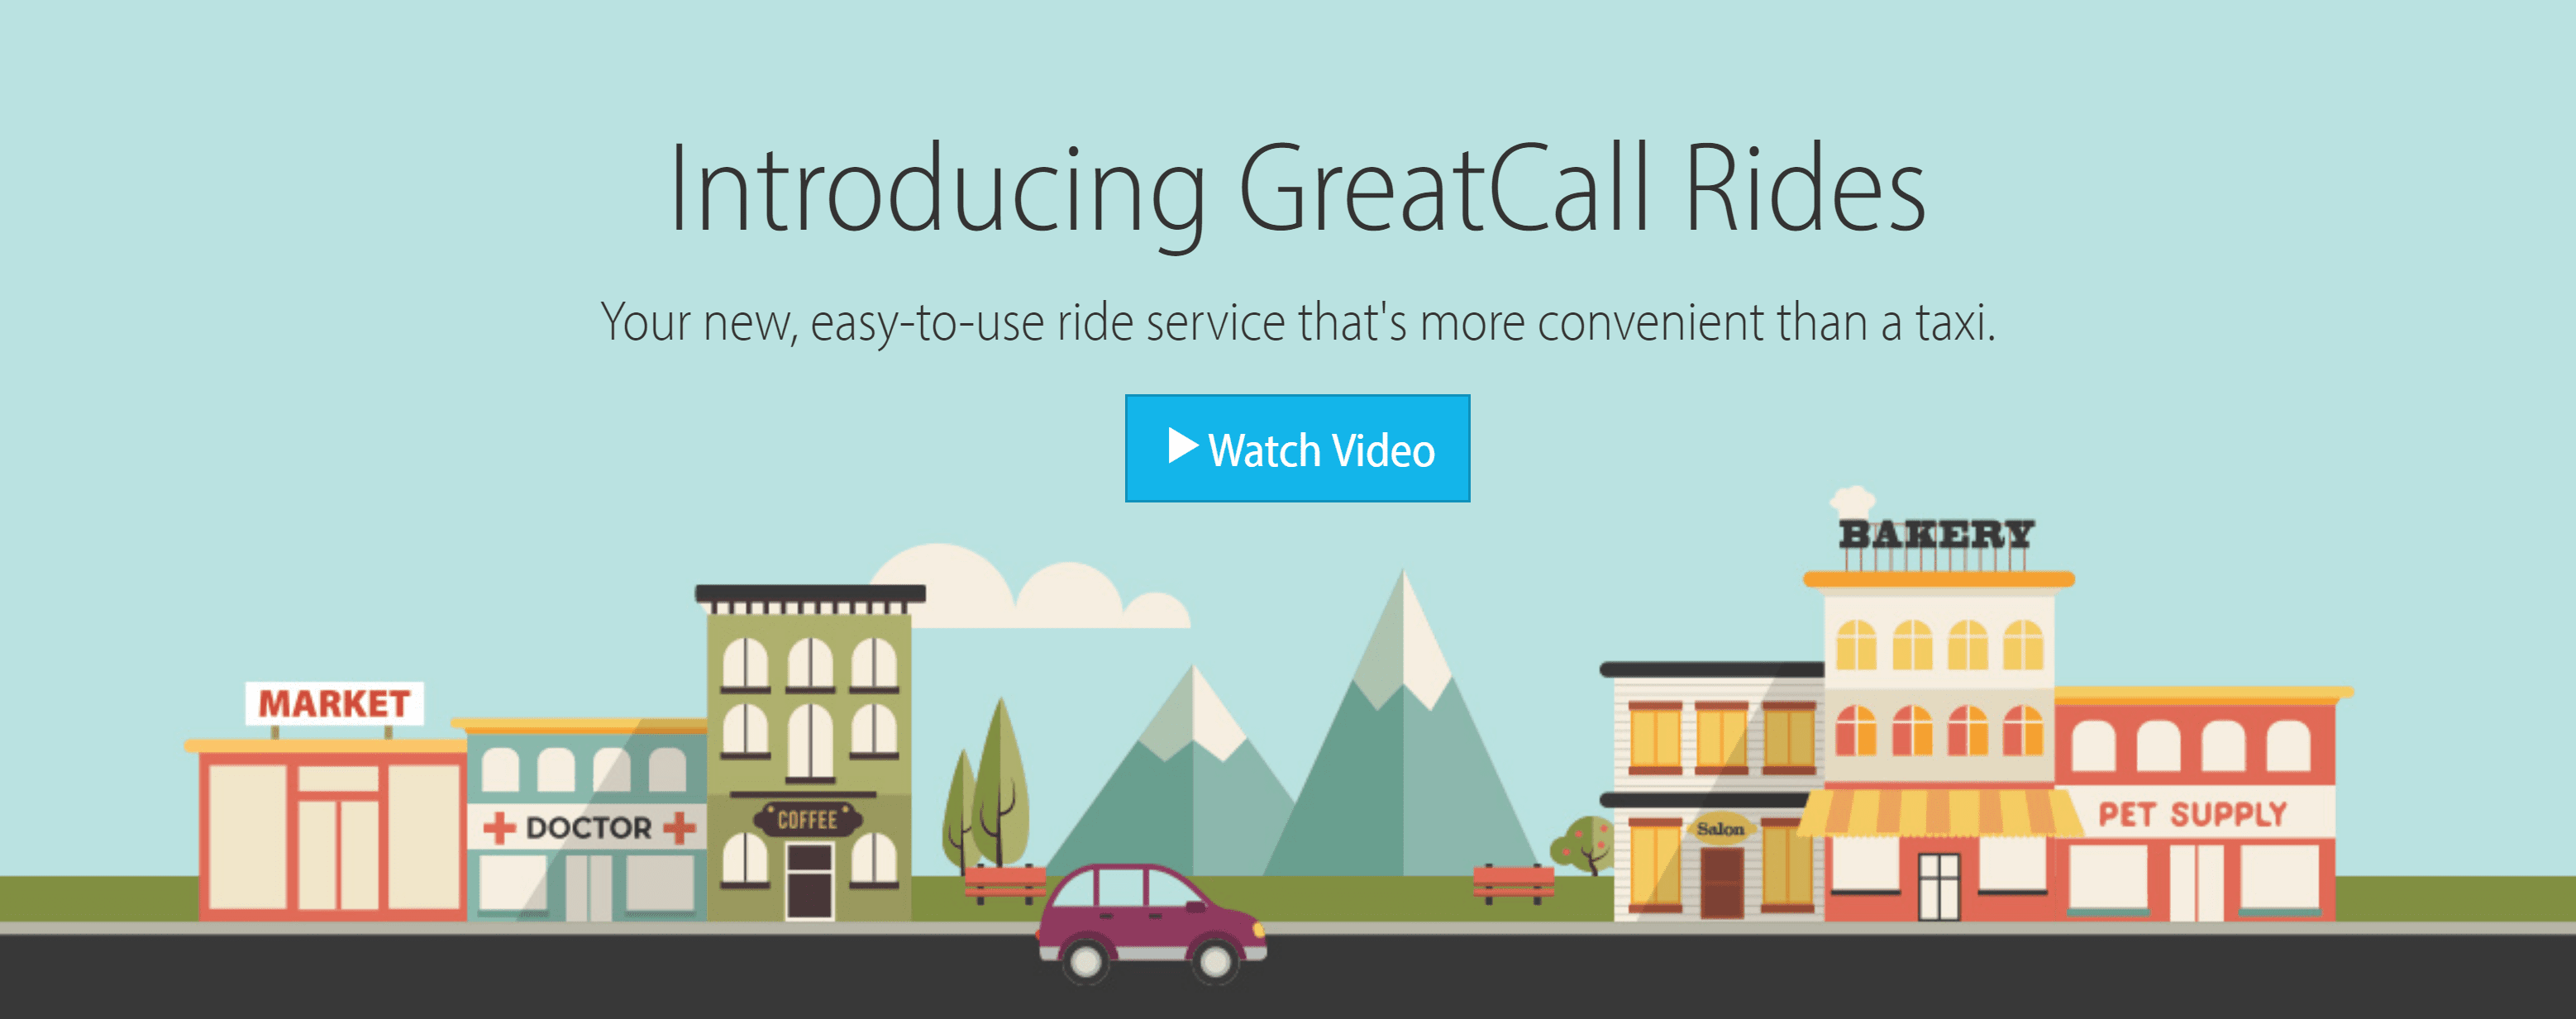 Сайт GreatCall Rides.